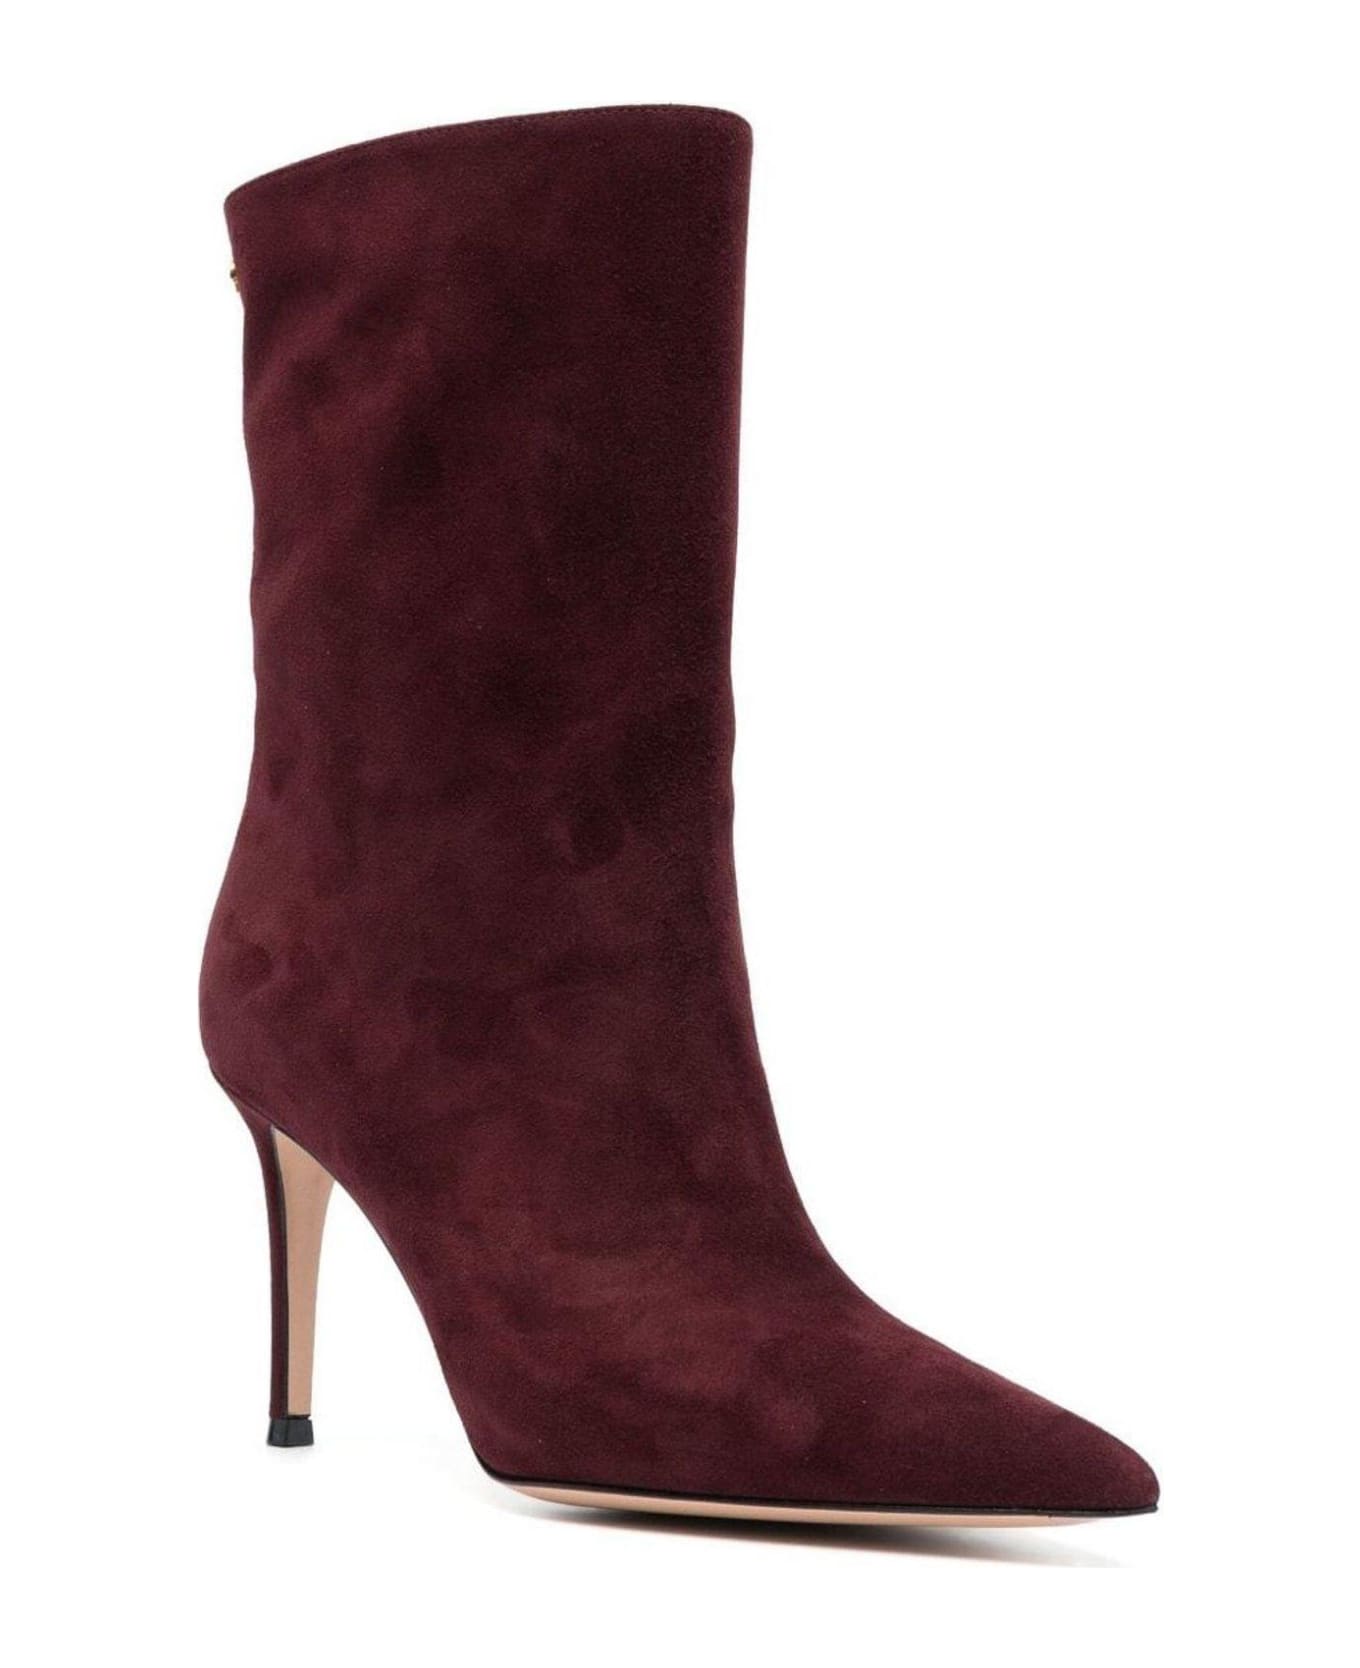 Gianvito Rossi Pointed-toe Ankle Boots - Red